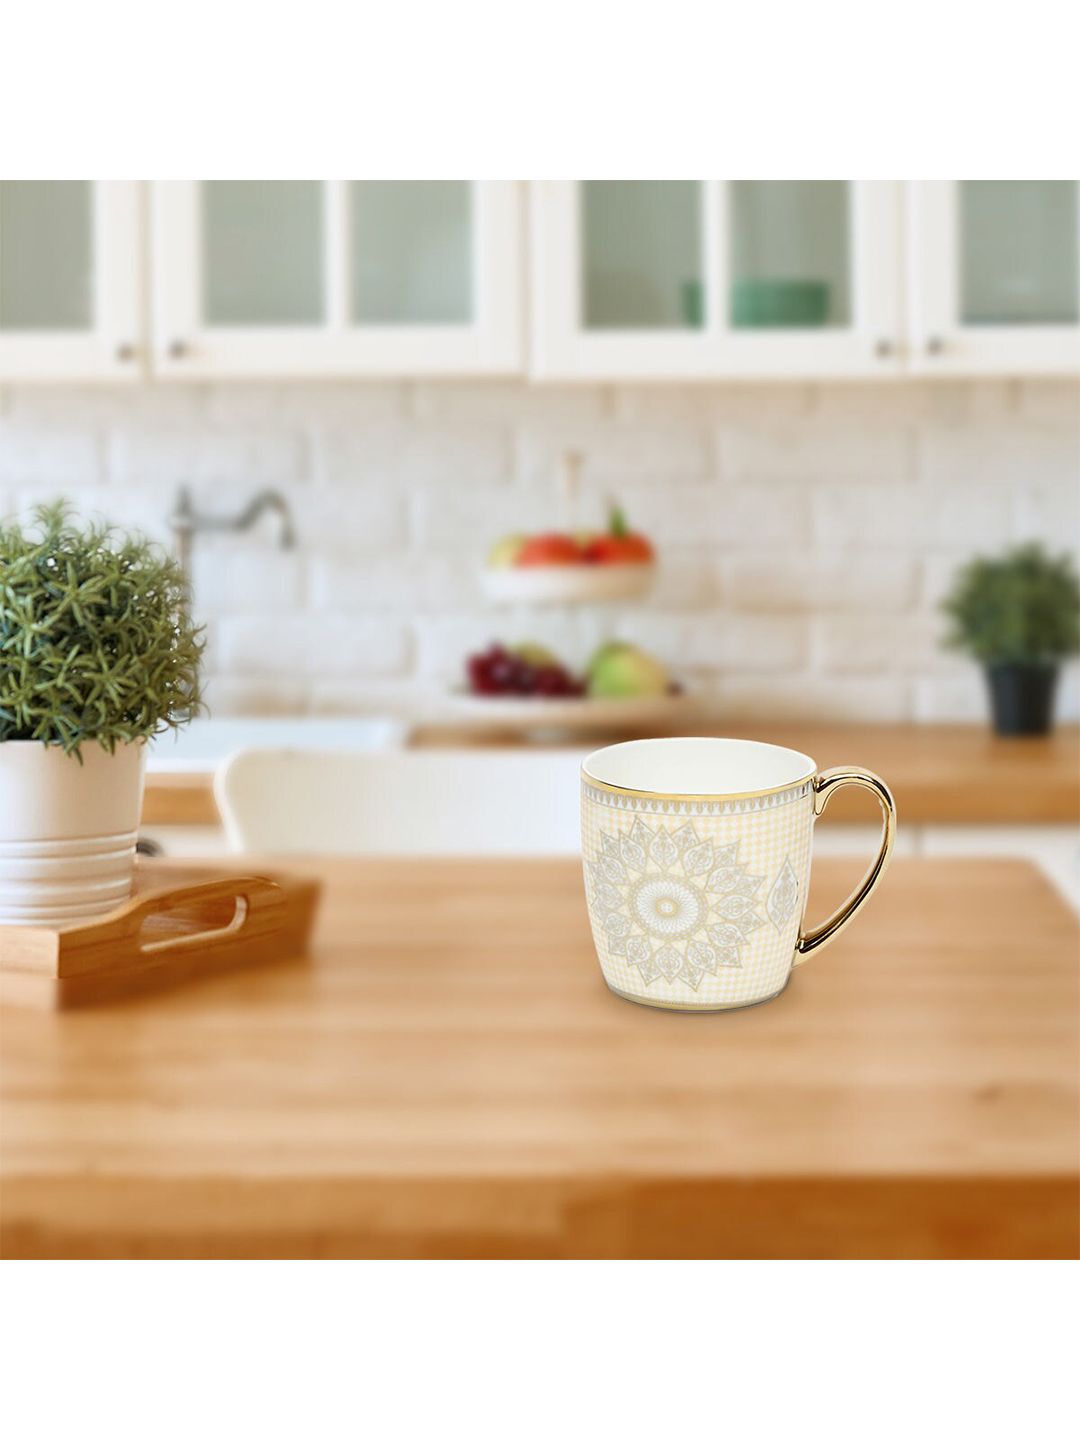 Athome by Nilkamal White & Gold-Toned Printed Ceramic Glossy Cups Set of Cups and Mugs Price in India